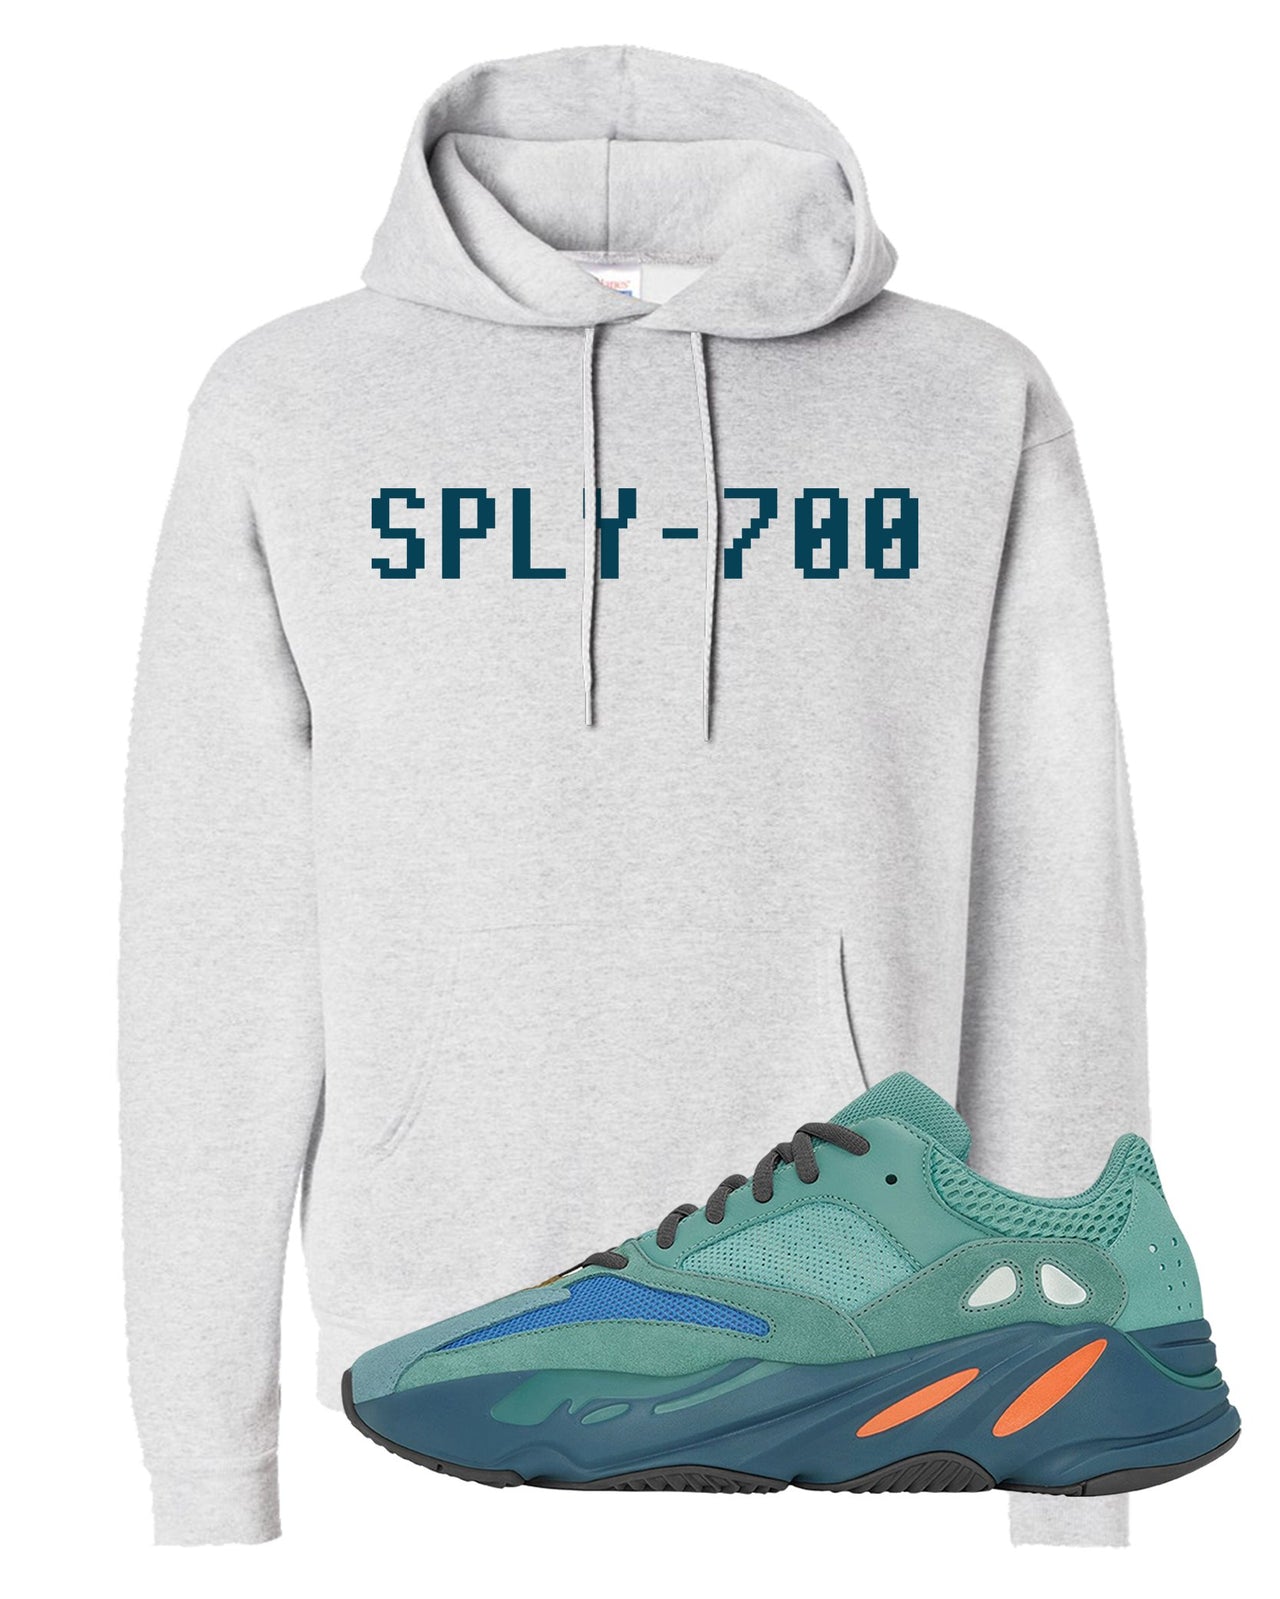 Faded Azure 700s Hoodie | Sply-700, Ash